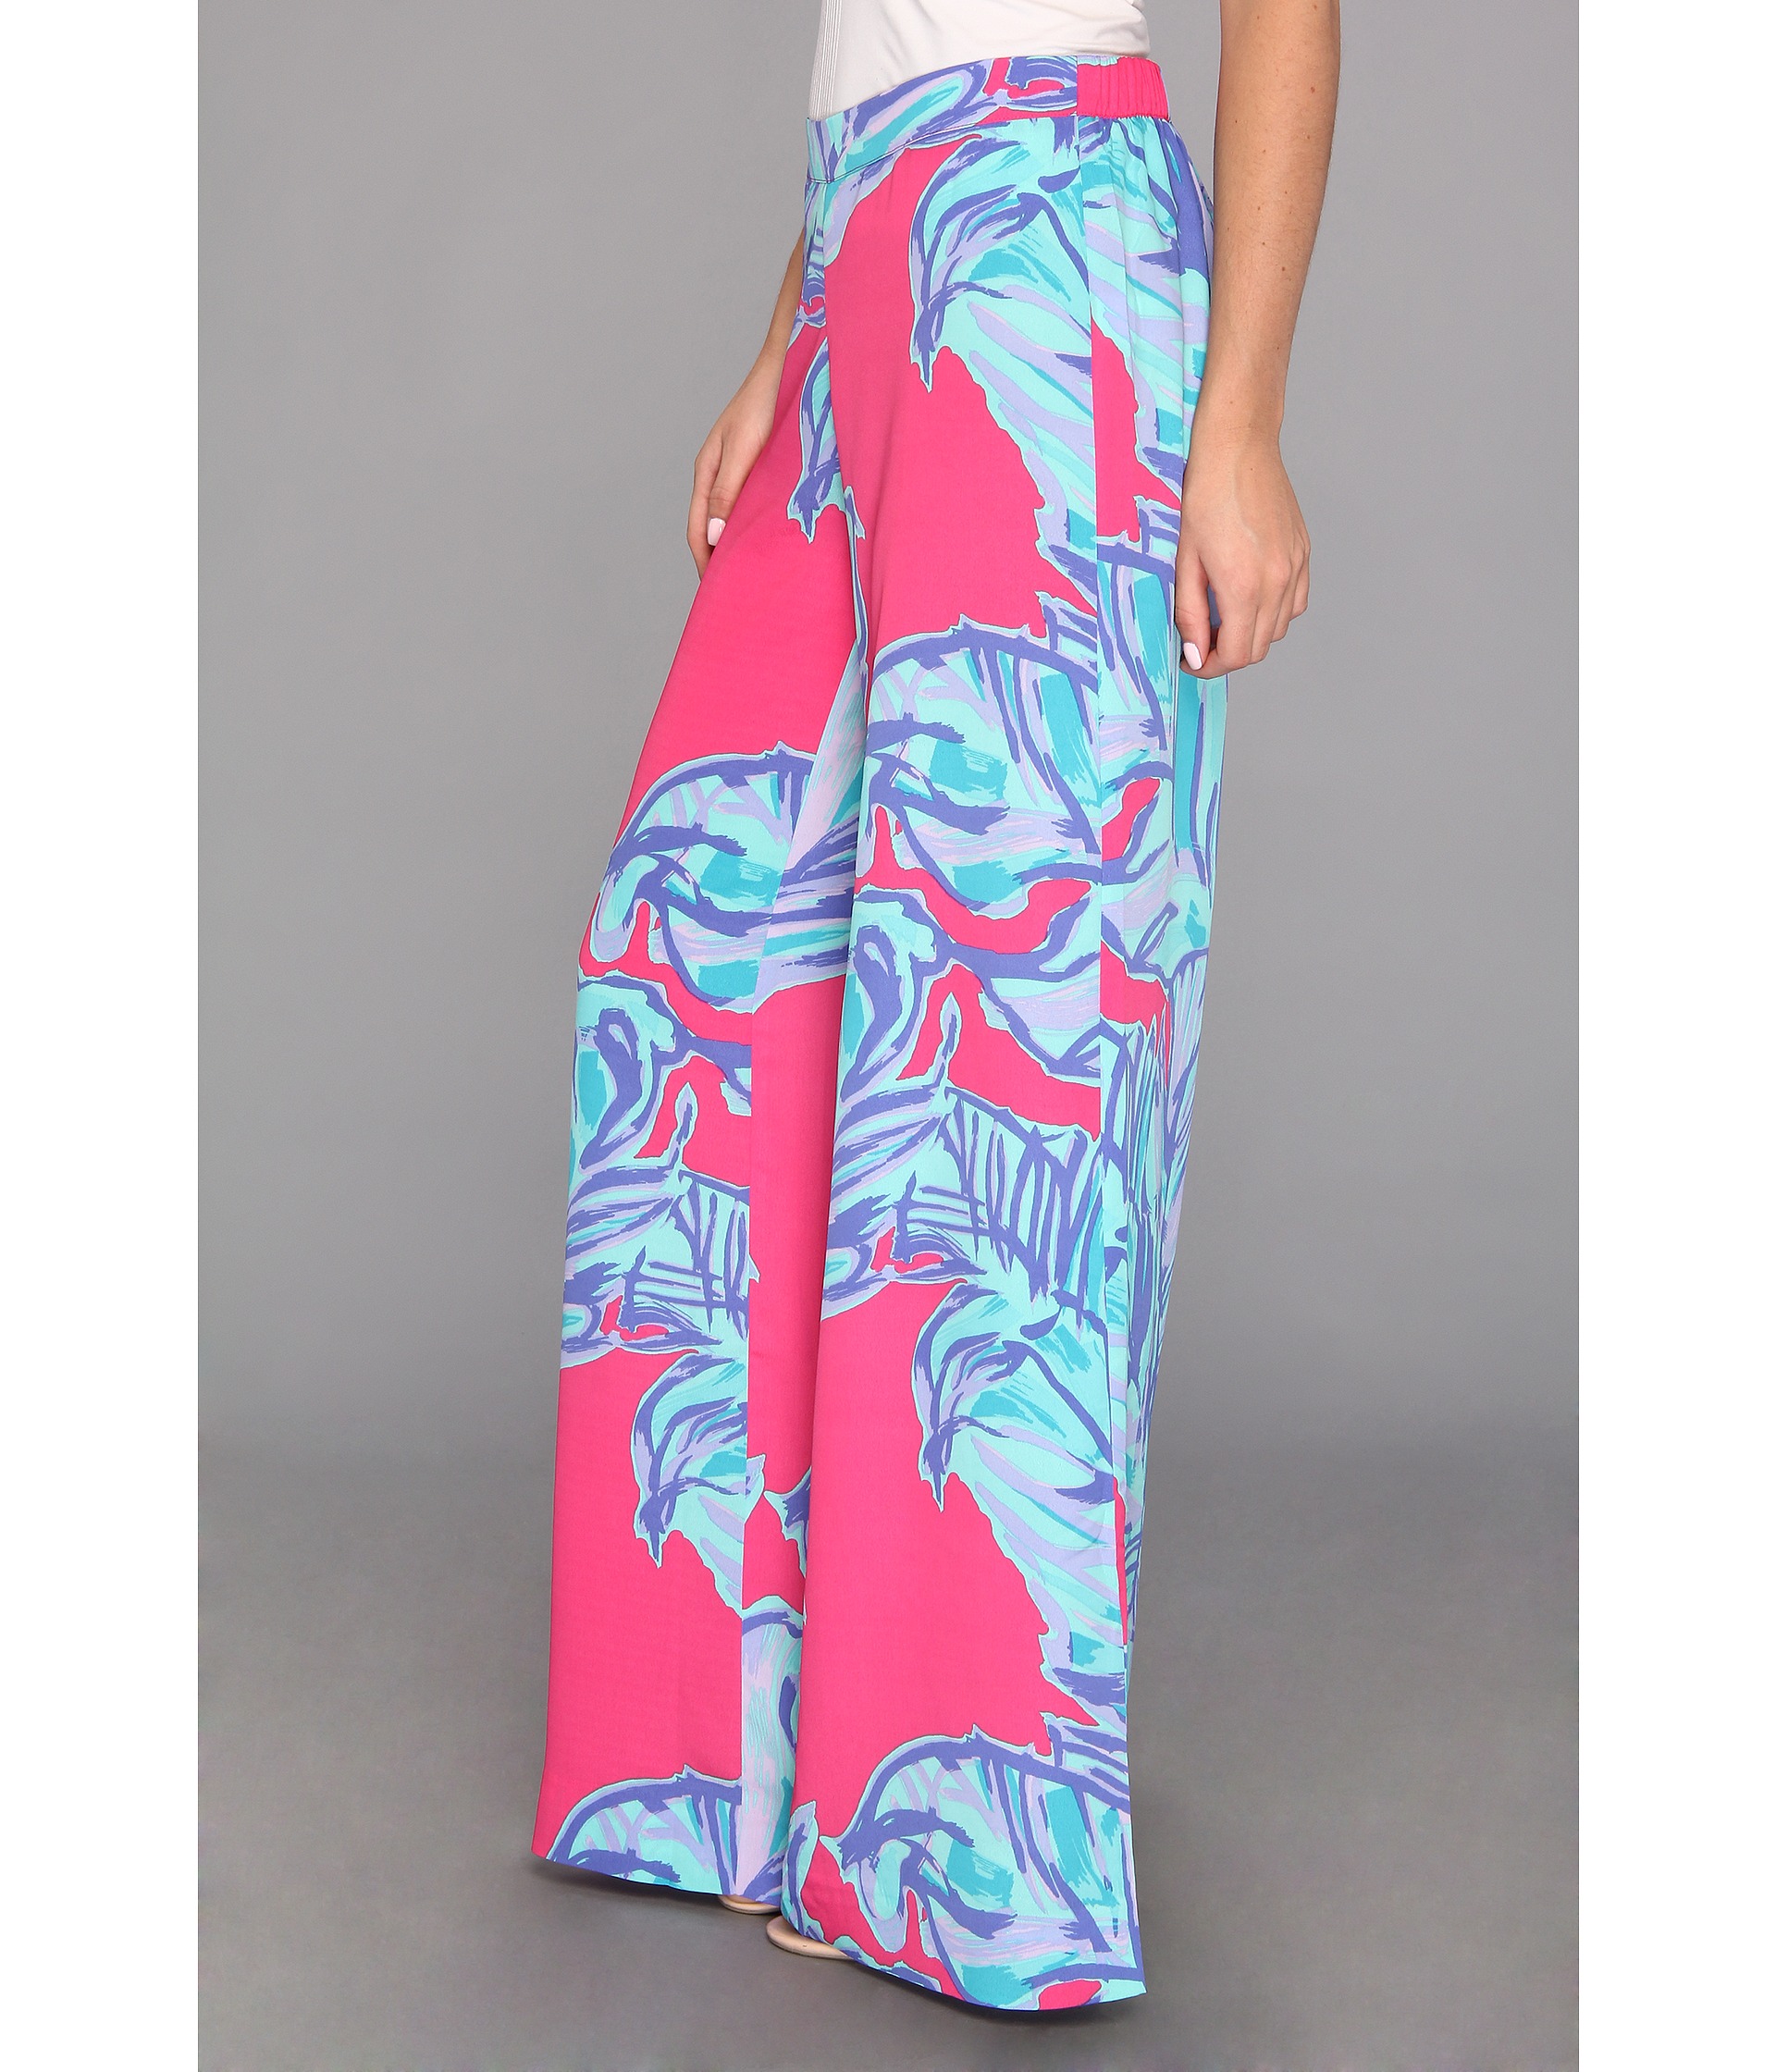 Lilly Pulitzer Middleton Palazzo Pant, Clothing | Shipped Free at Zappos